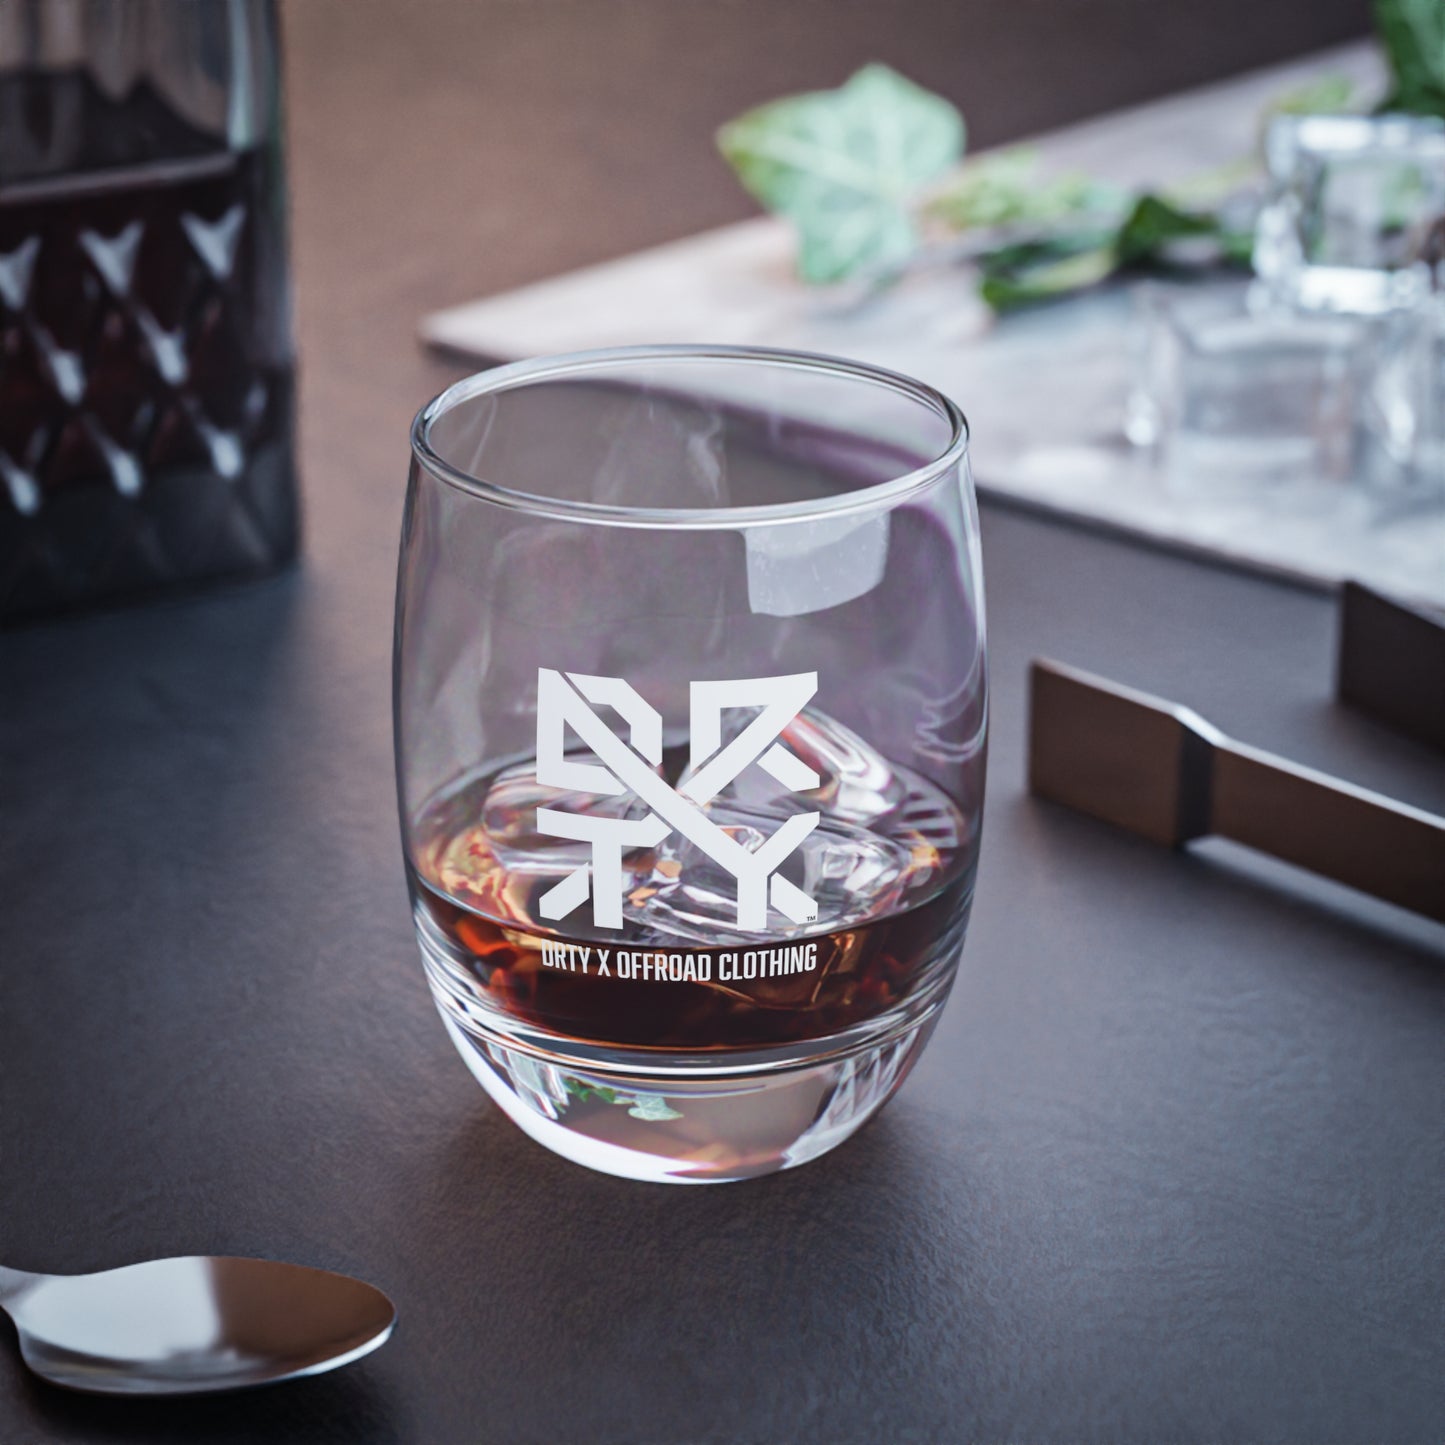 This image showcases a DRTY X branded whiskey glass on a table.